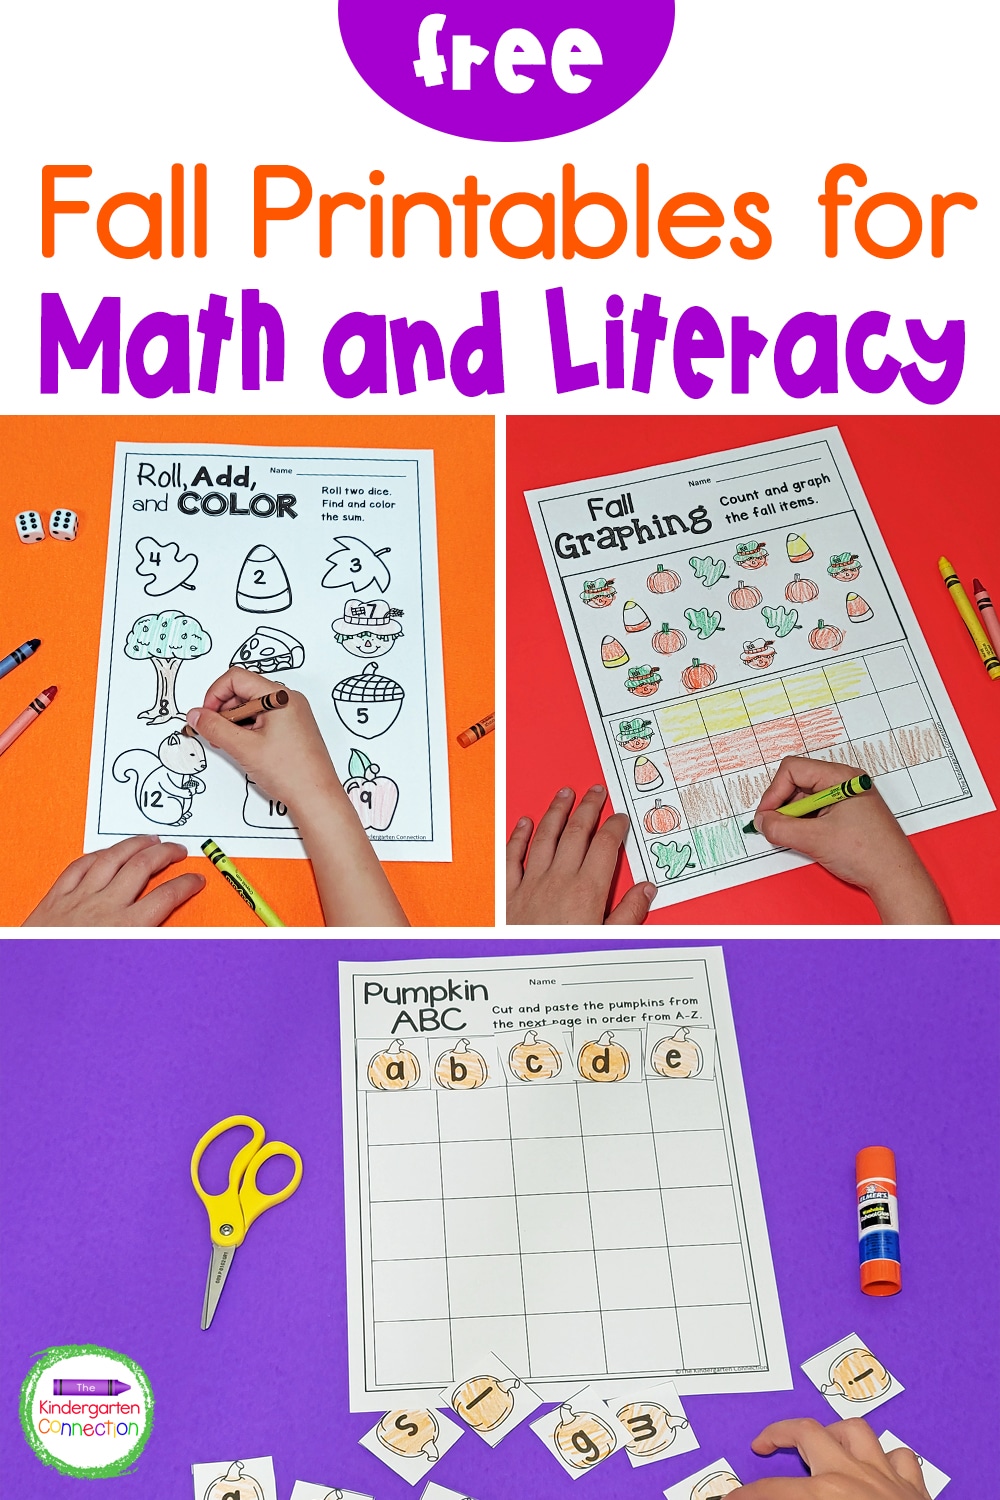 These free fall printables provide practice with important math AND literacy skills while bringing in a bit of fall fun!